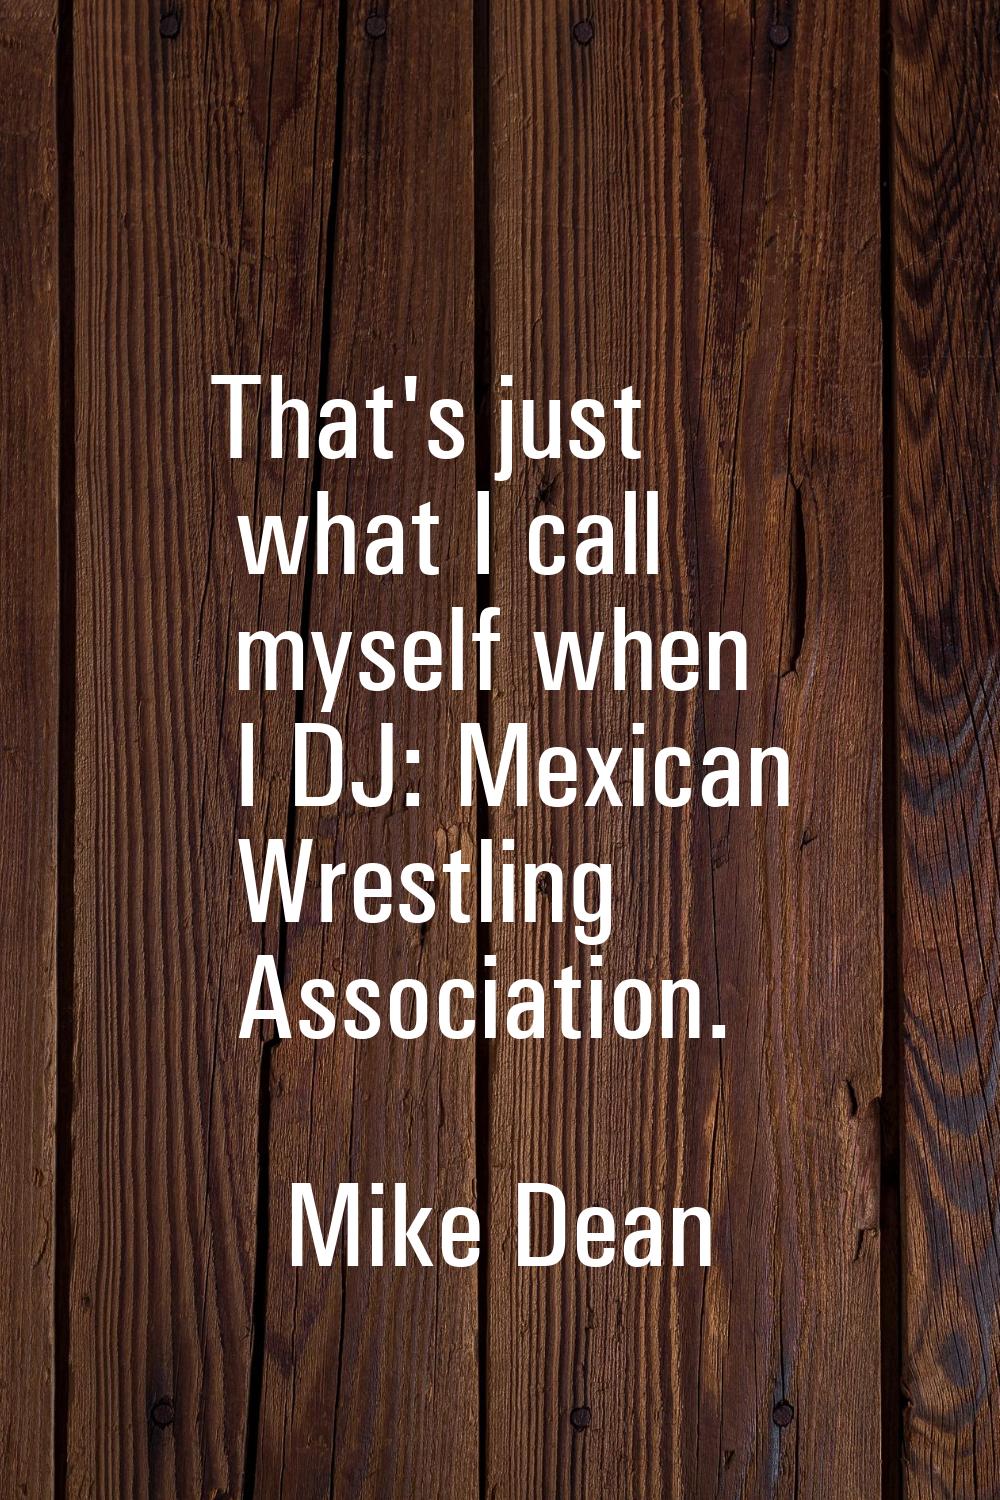 That's just what I call myself when I DJ: Mexican Wrestling Association.